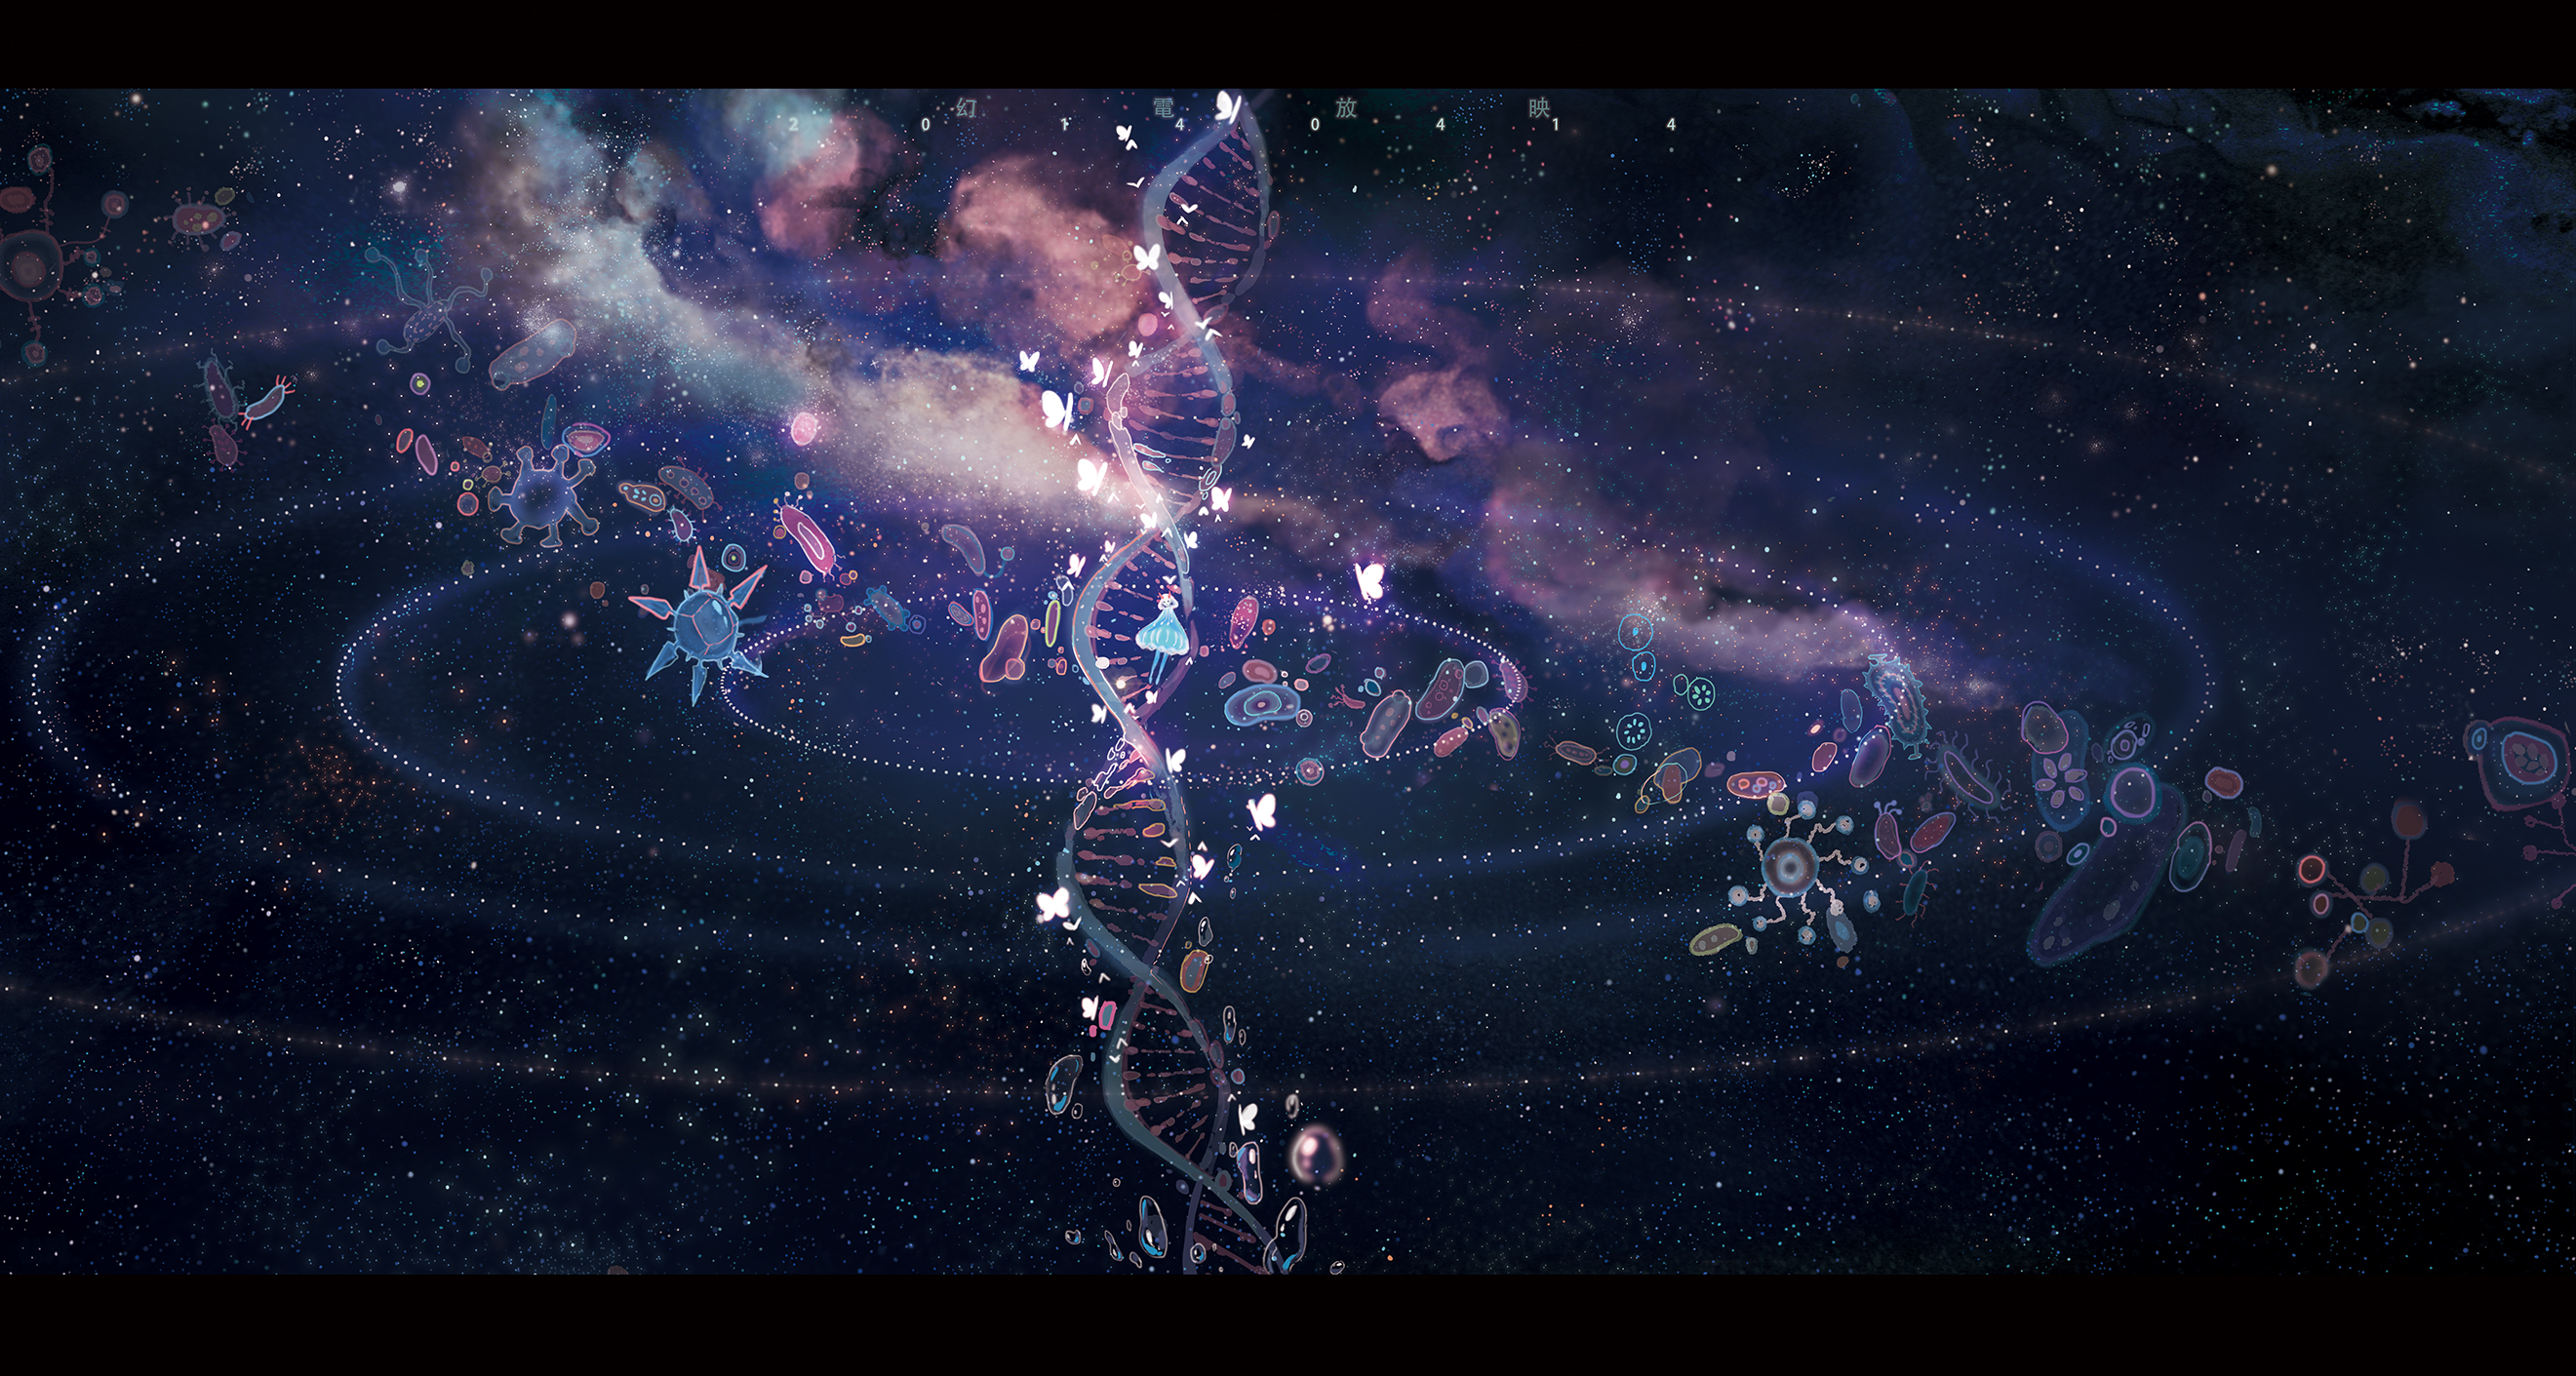 DNA string in space Wallpaper hd background - Fresh HD Wallpapers